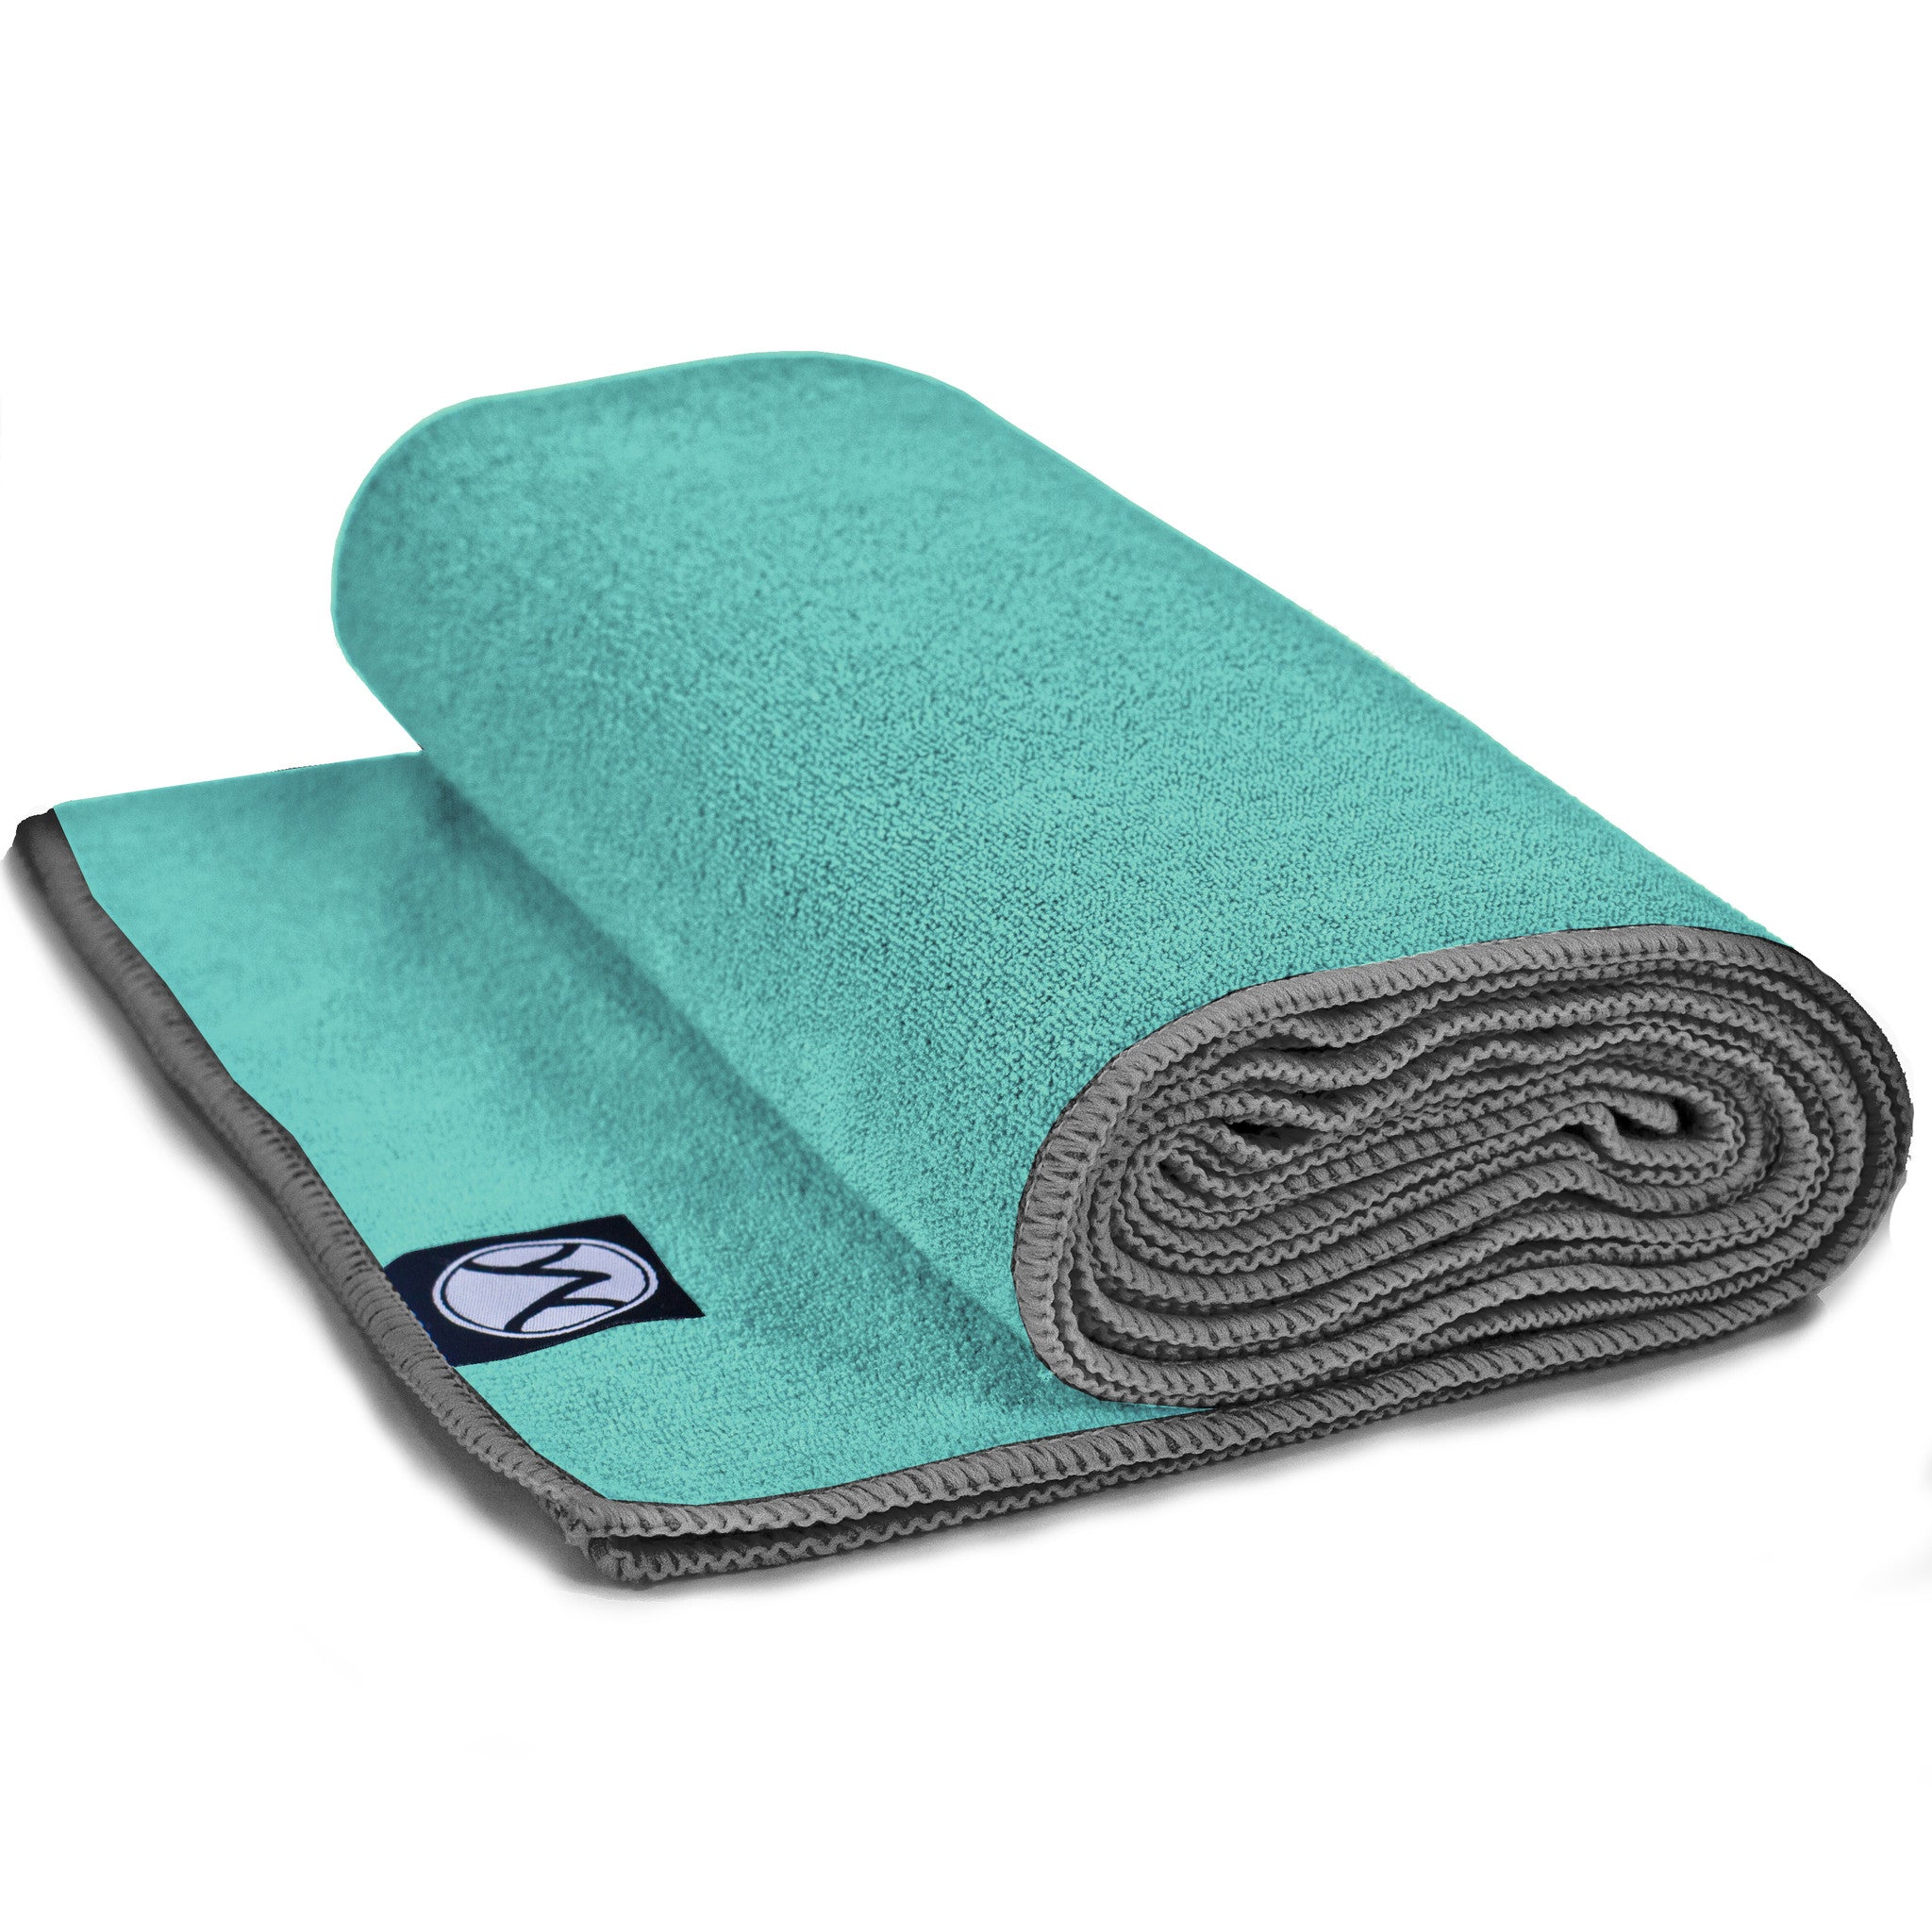 Youphoria Hot Yoga Towel - The perfect addition to your yoga mat.